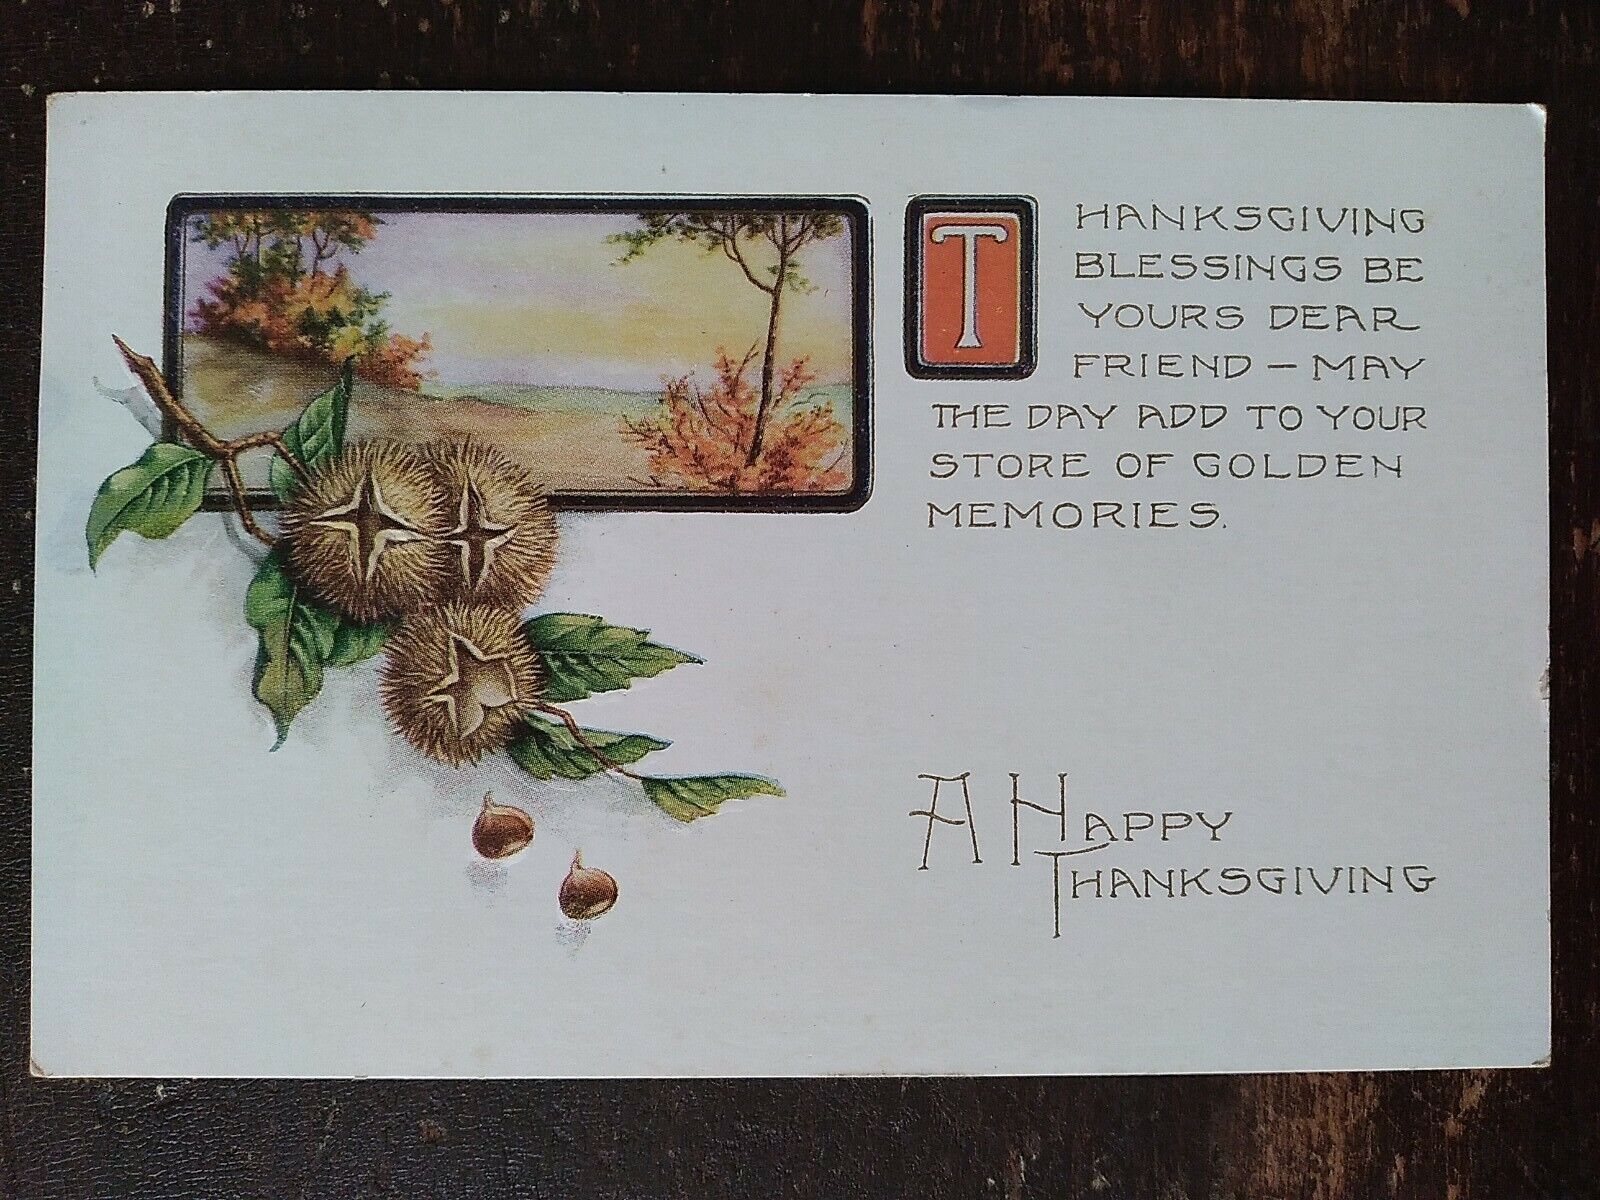 Thanksgiving Blessings Be Yours, Chestnut Branch & Foliage - Early 1900s 